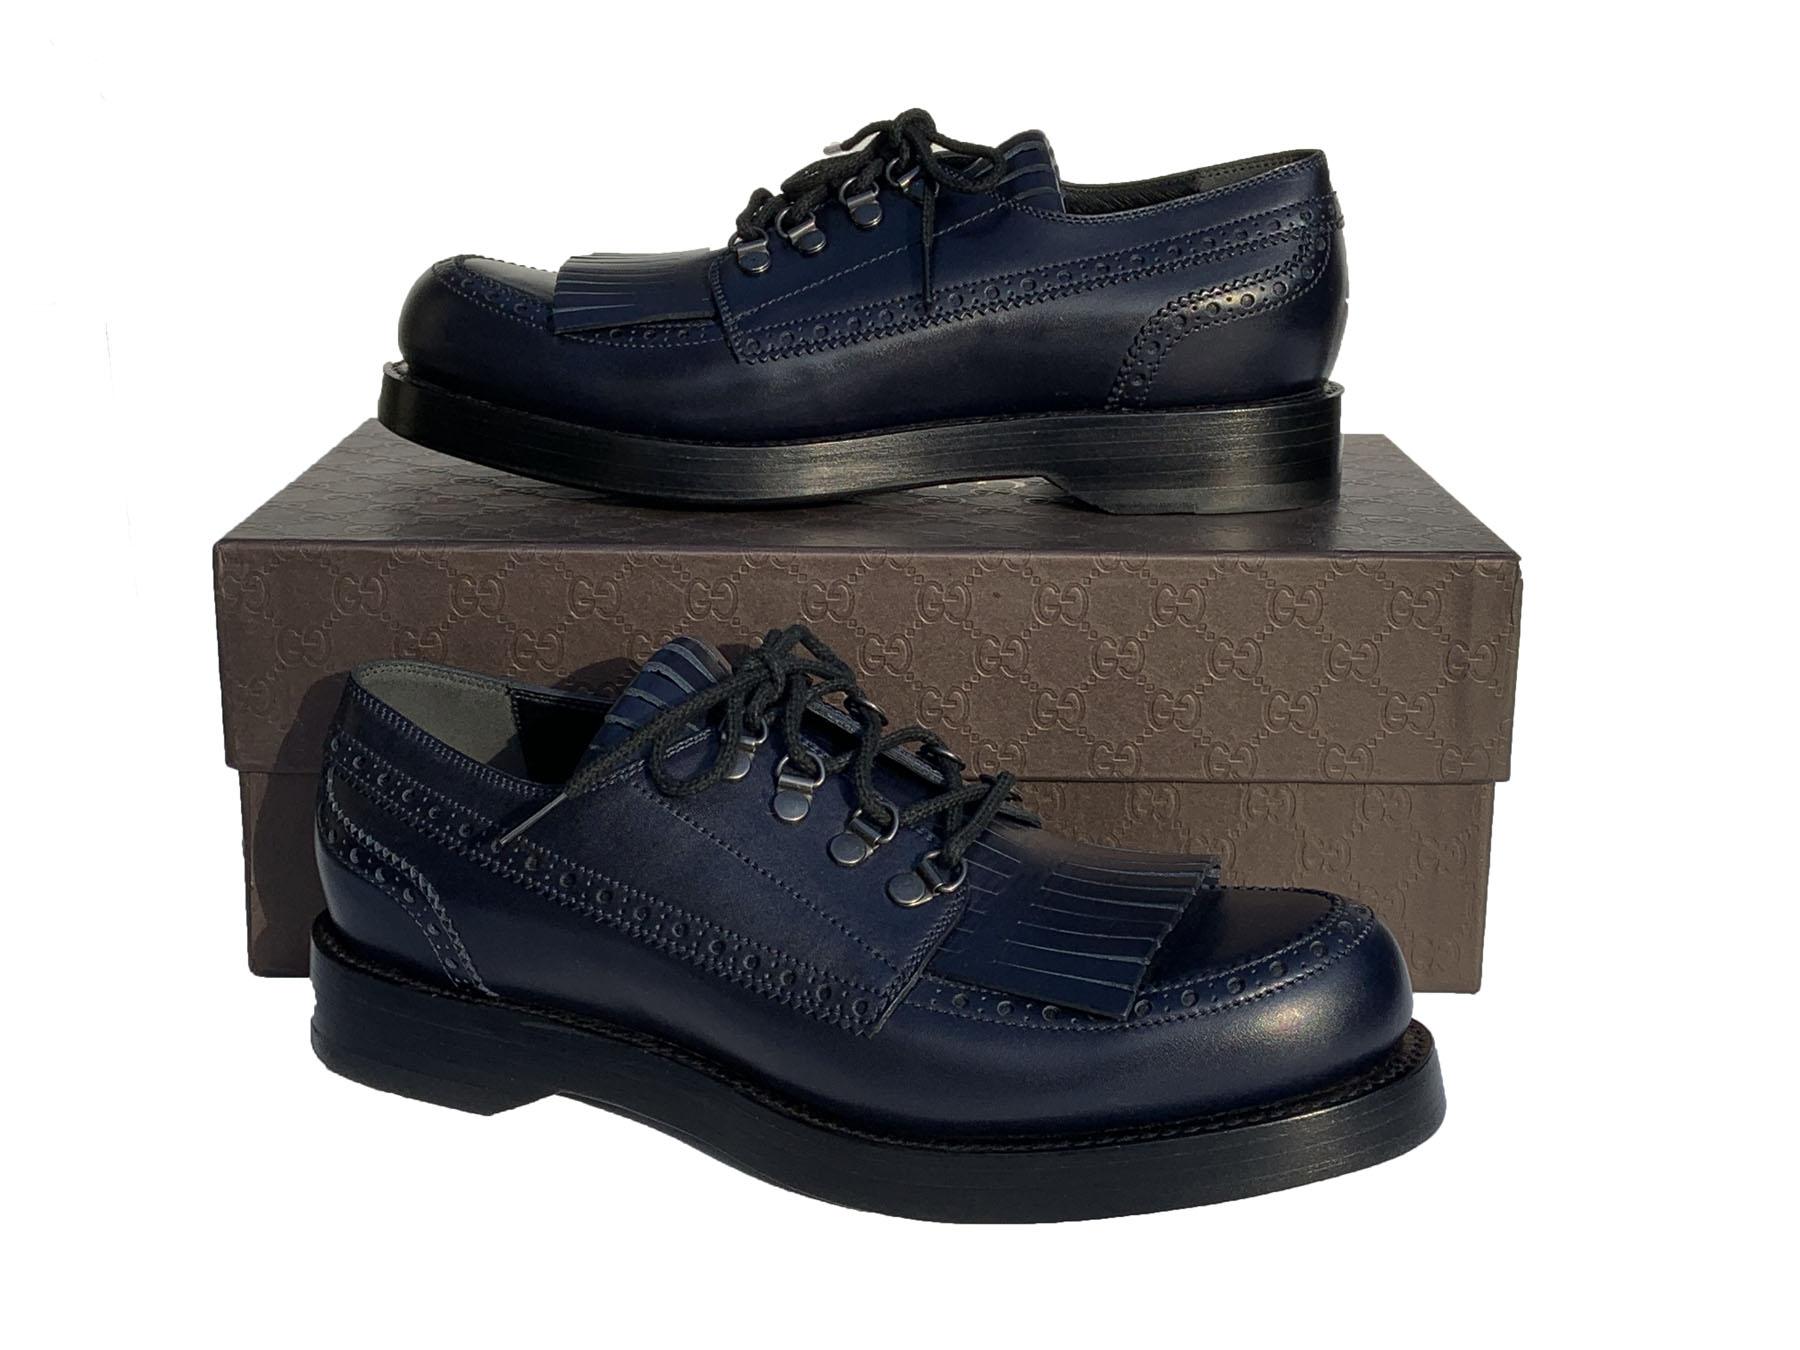 New Gucci Men's Leather Fringed Brogue Lace-Up Shoes Dark Blue US 10 For Sale 4